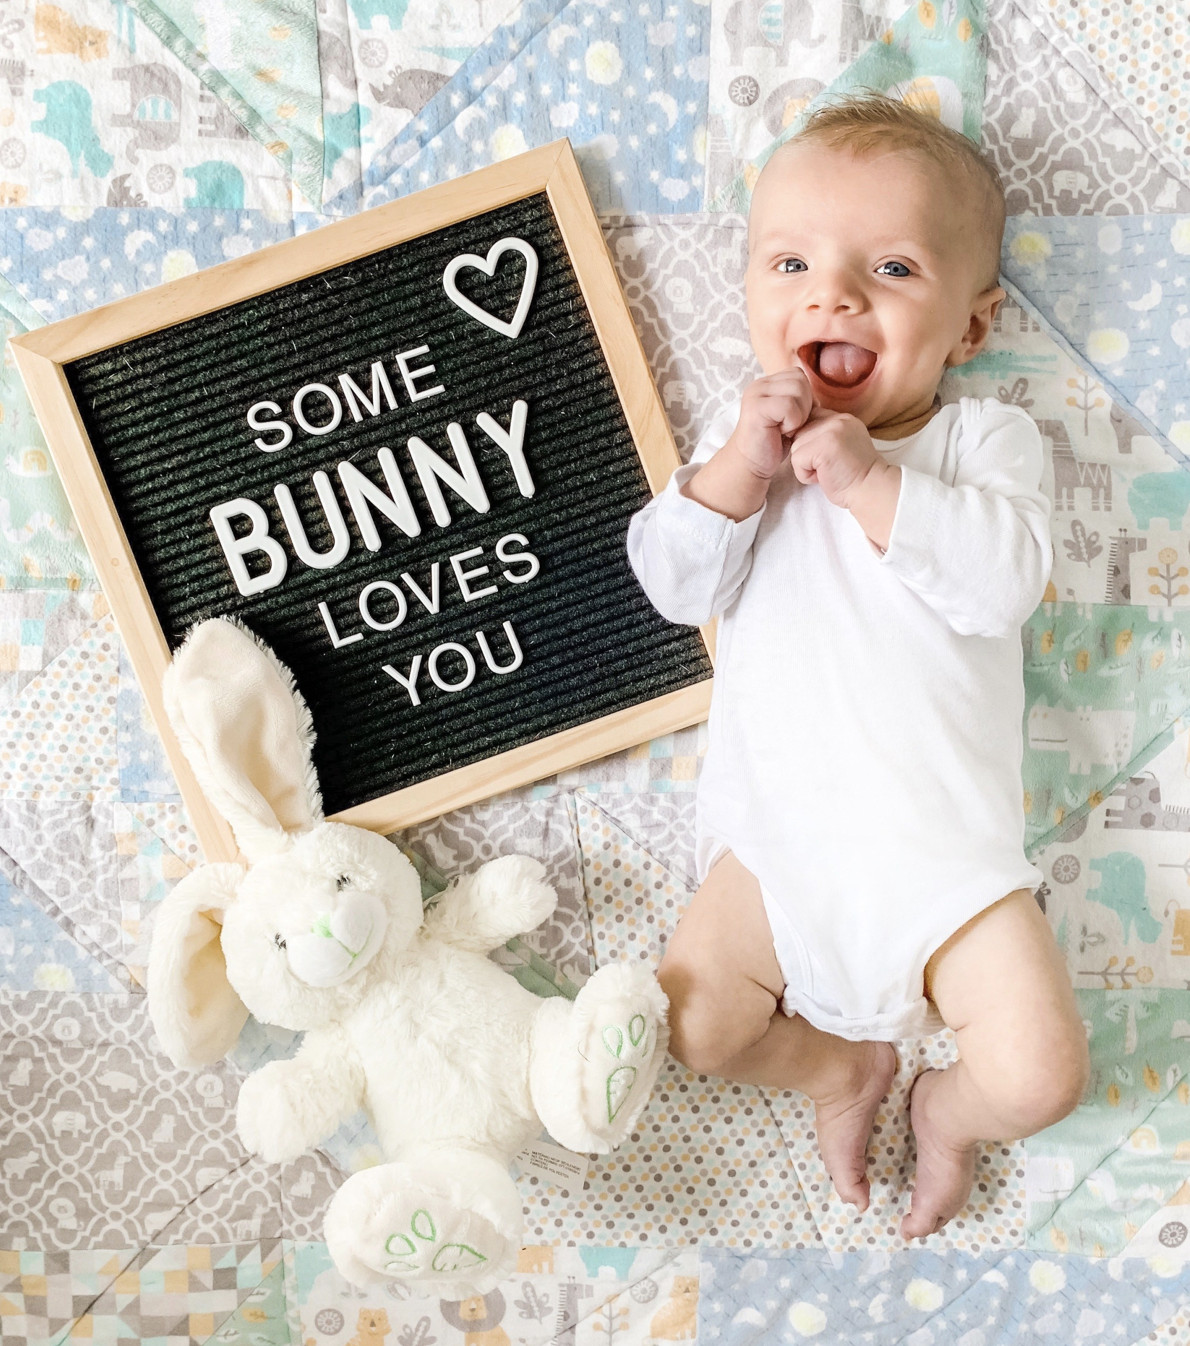 Baby Easter Photo Ideas
 Easter Baby Picture Ideas Best DIY to Inspire Your Baby